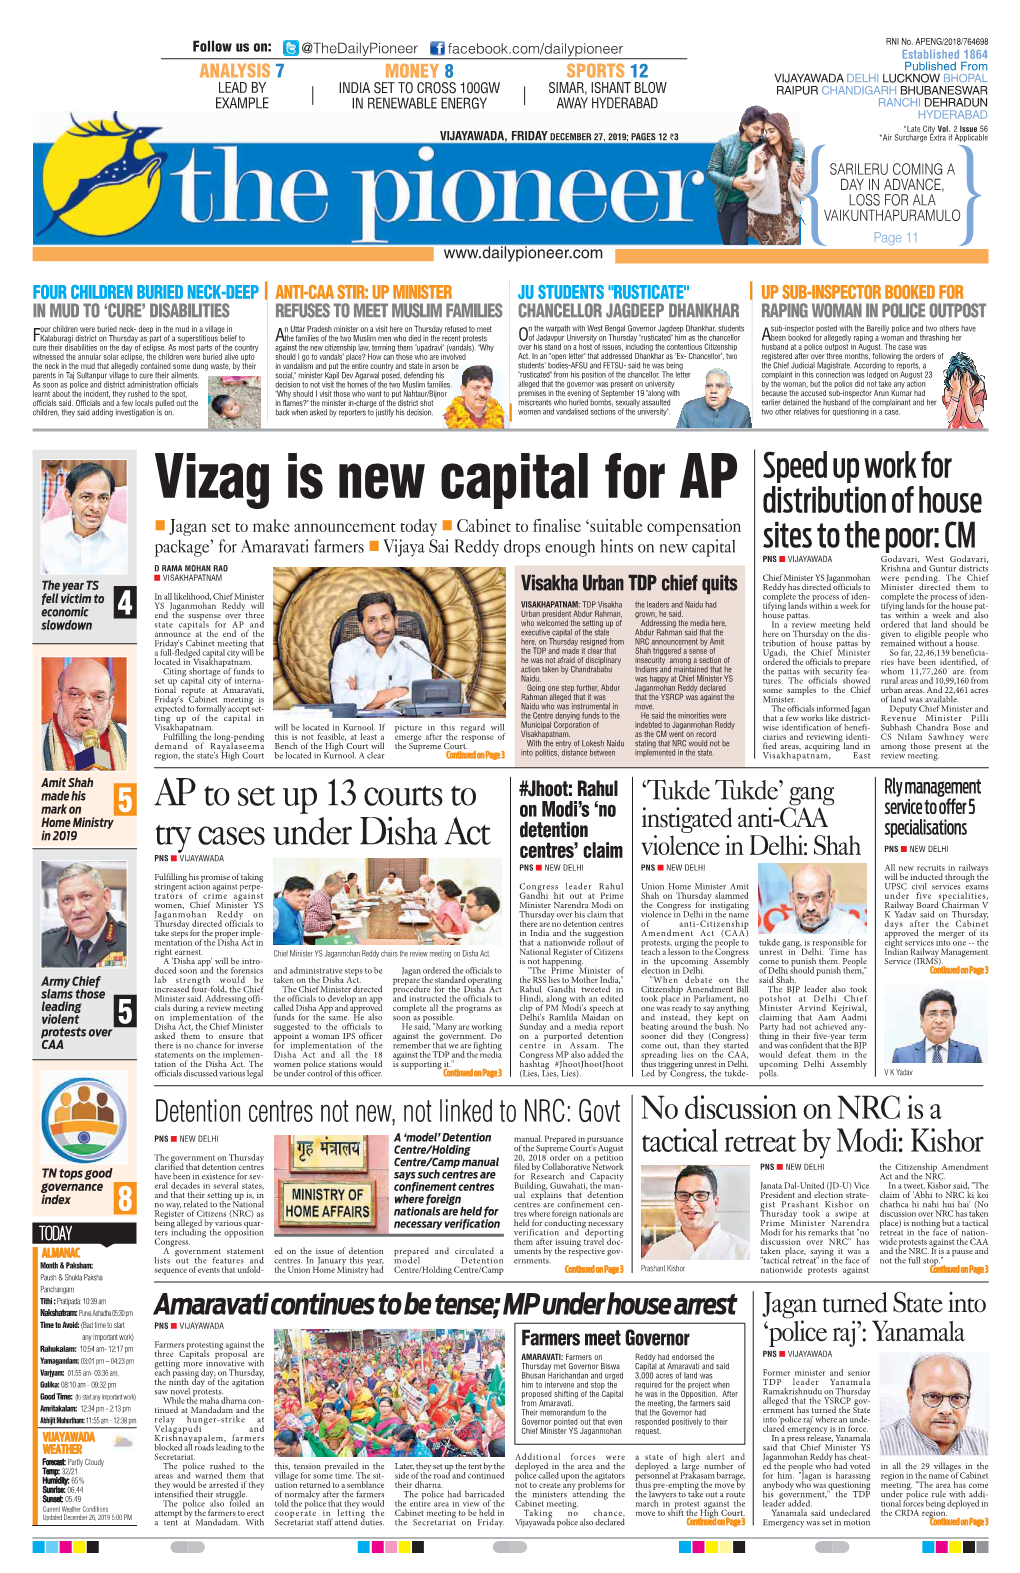 Vizag Is New Capital for AP